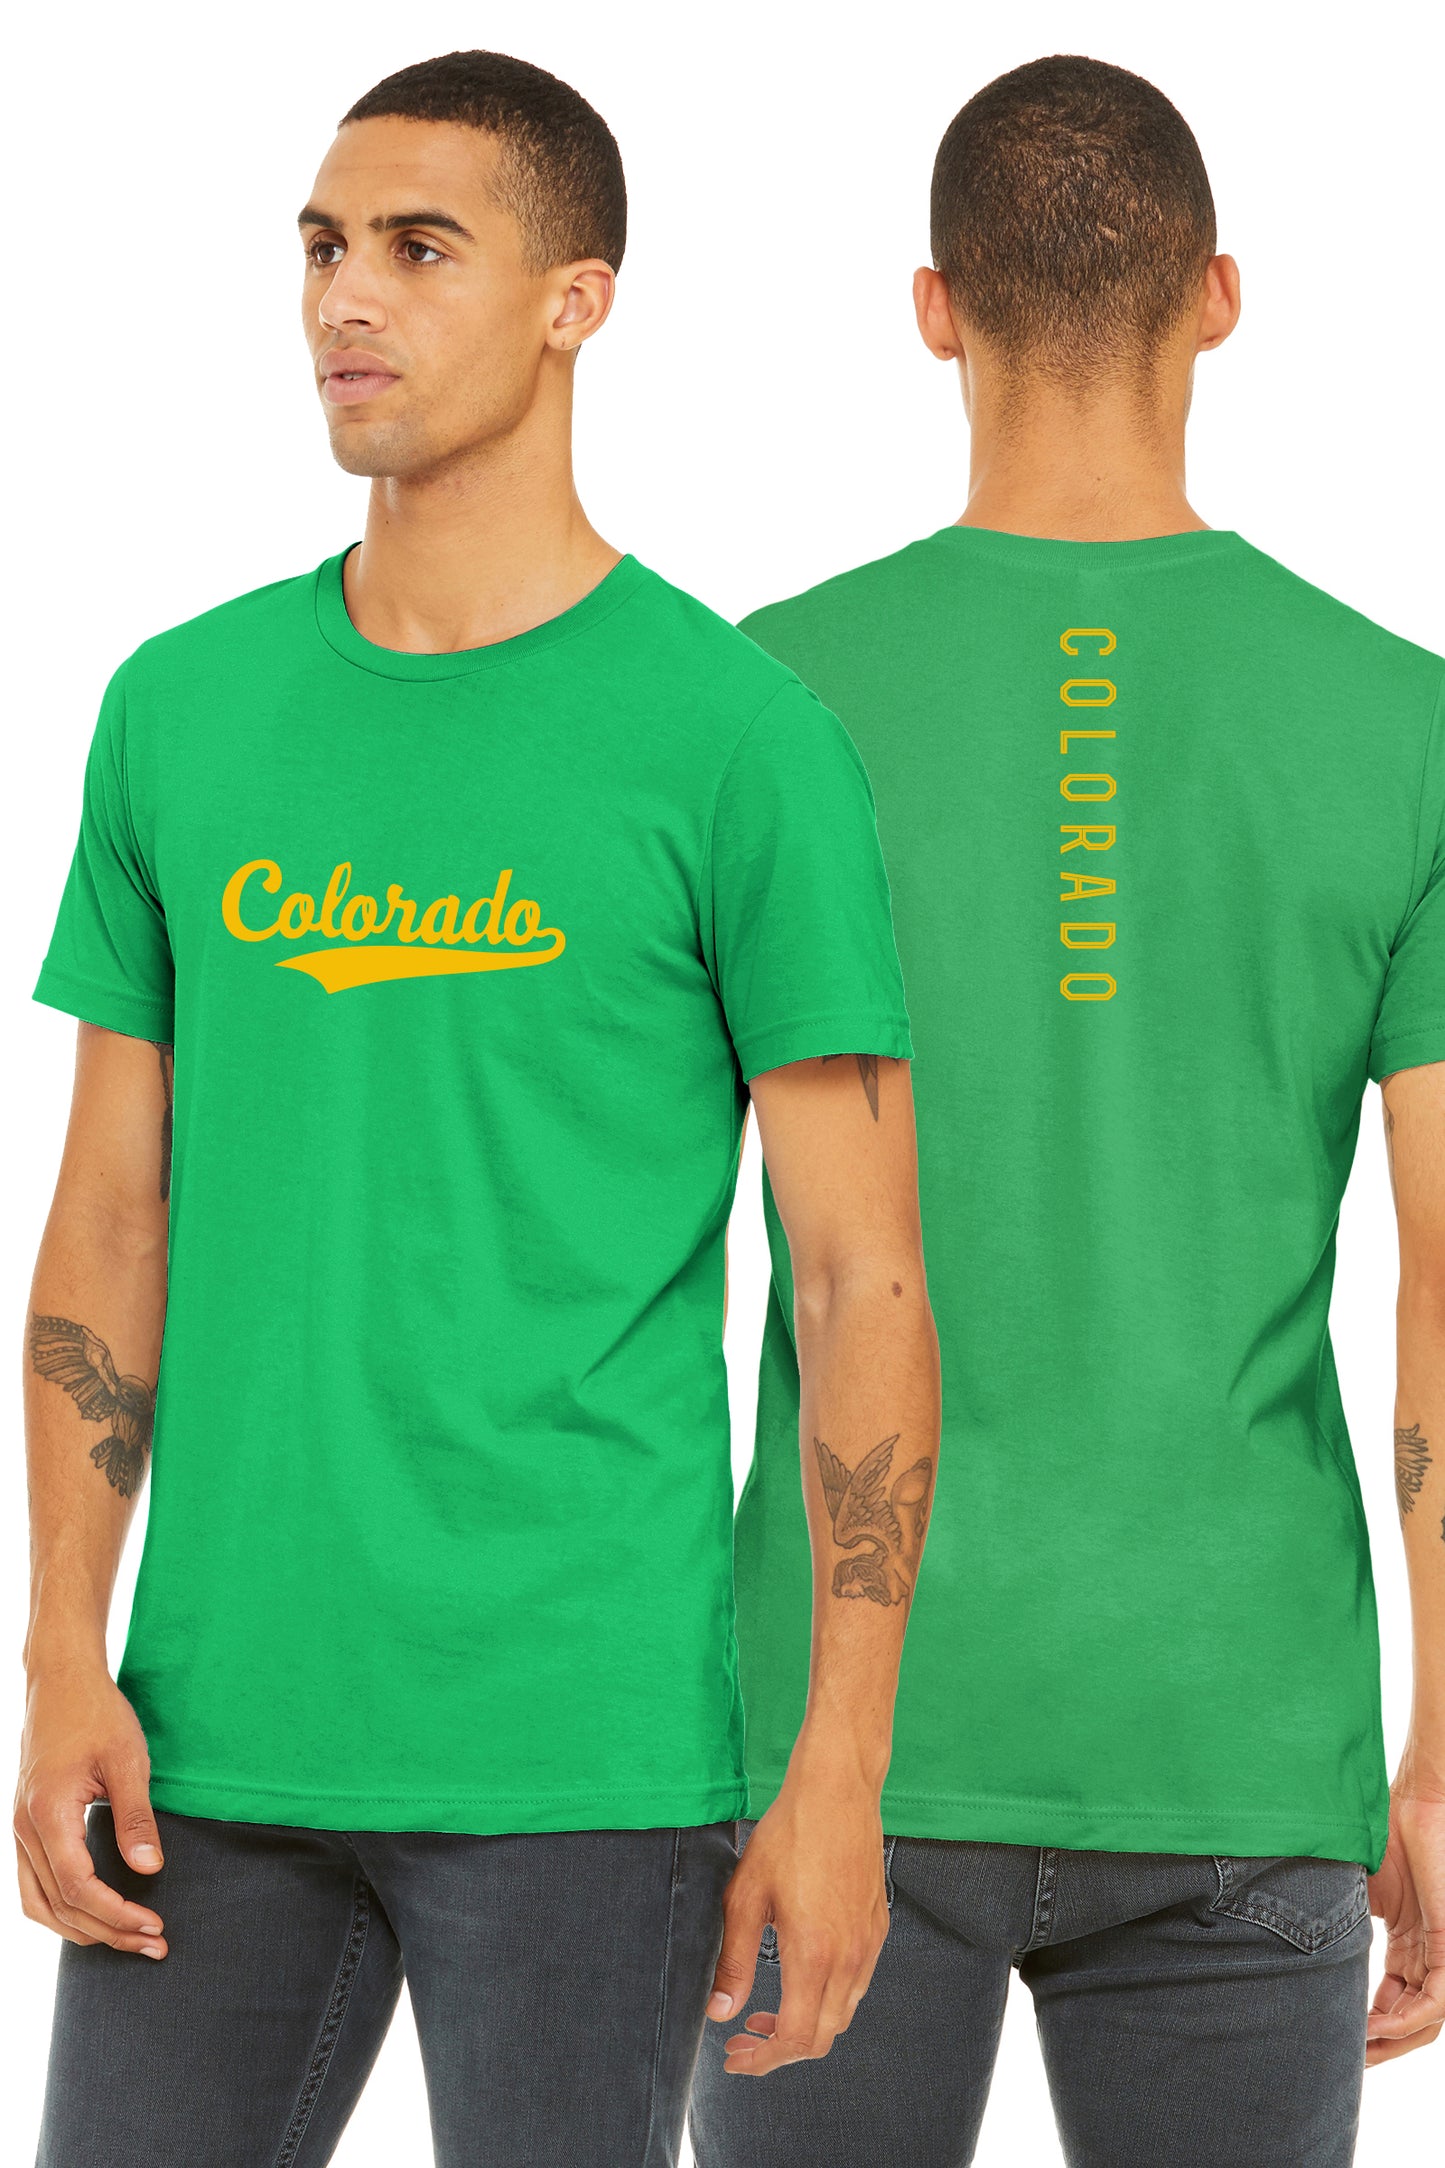 Daxton Adult Unisex Tshirt Colorado Script with Vertical on the Back